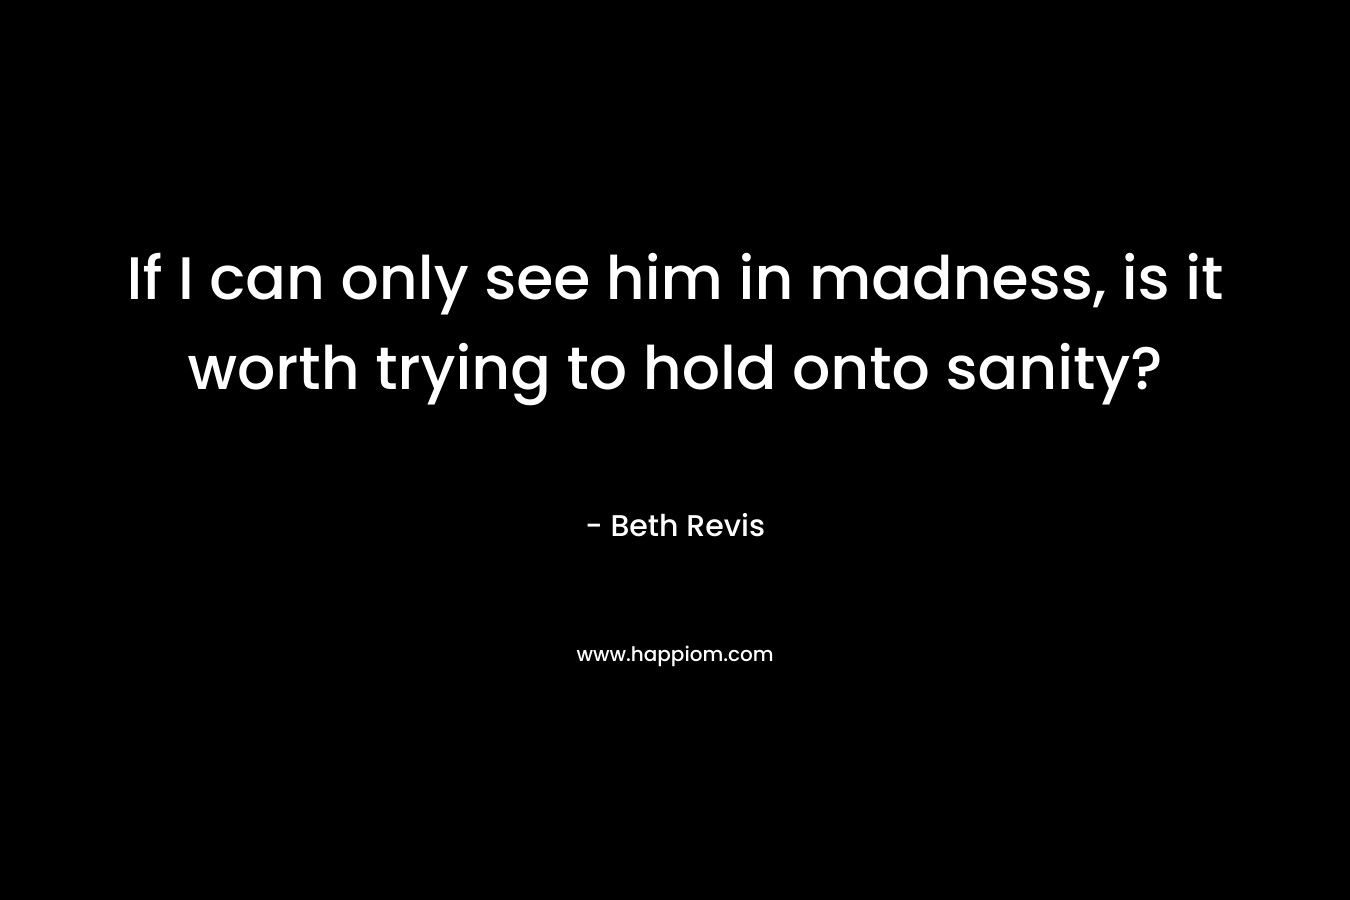 If I can only see him in madness, is it worth trying to hold onto sanity?